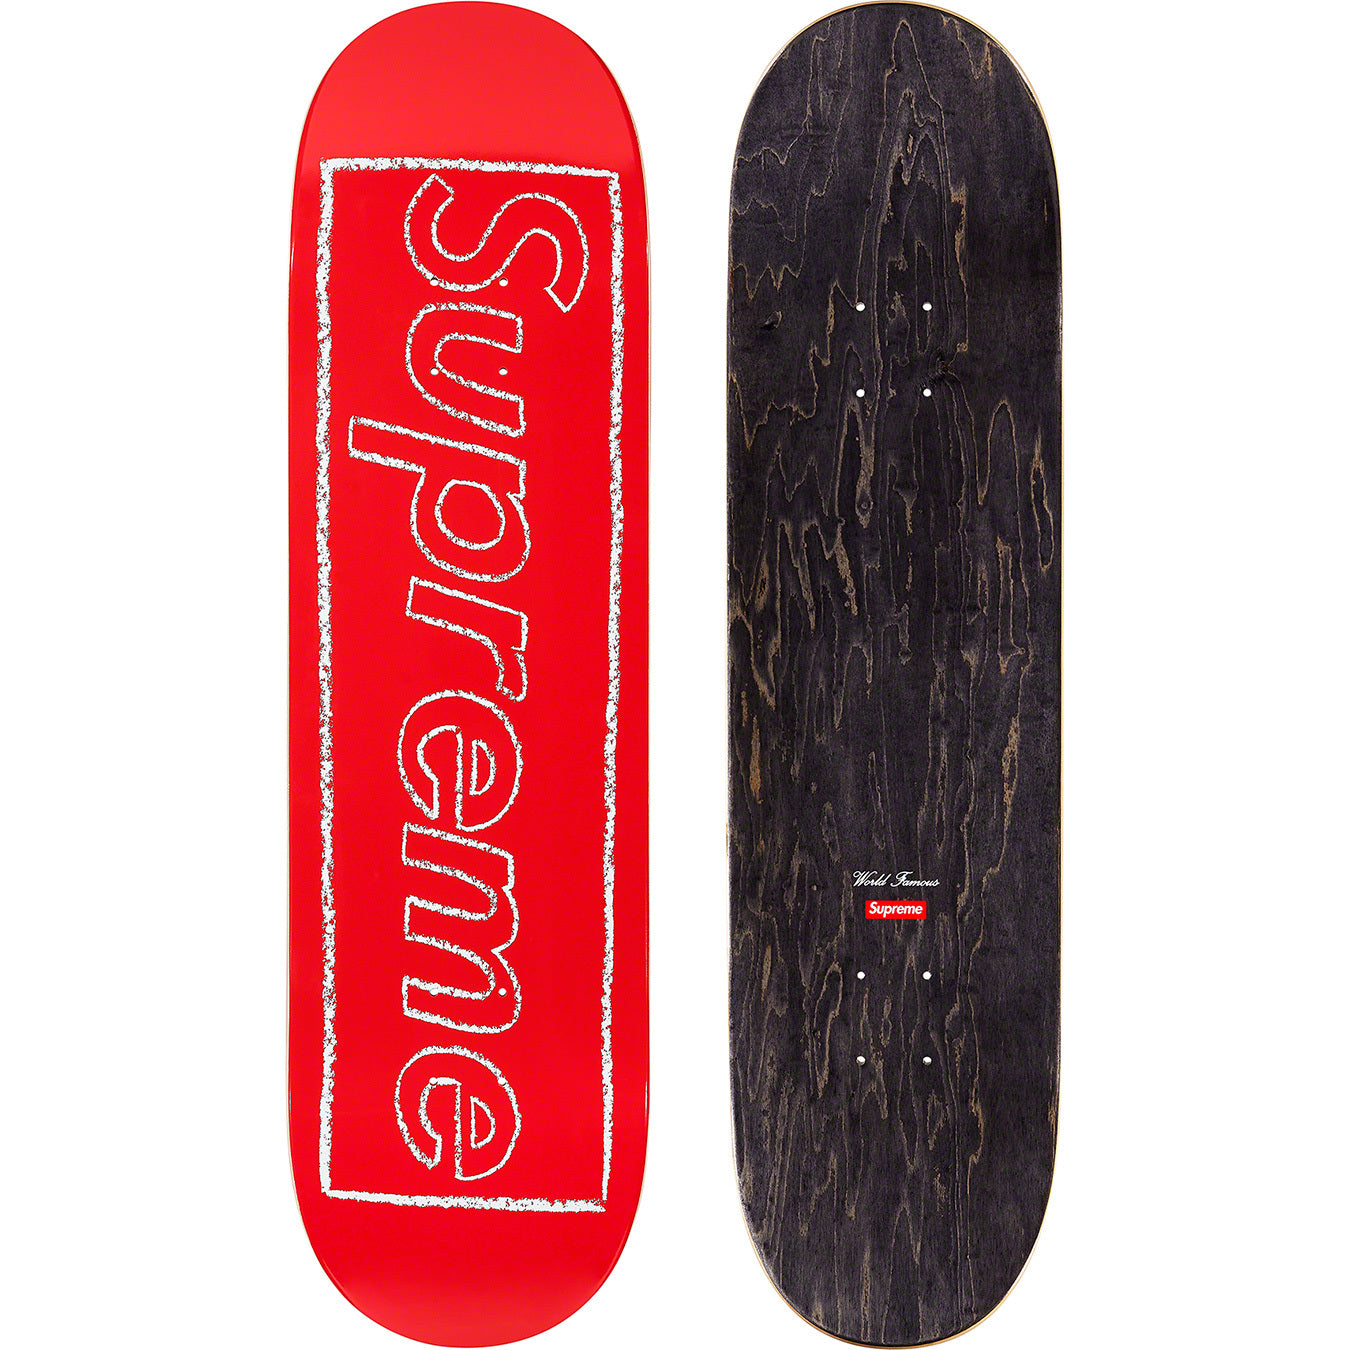 KAWS Chalk Logo Skateboard Red by Supreme from £150.00